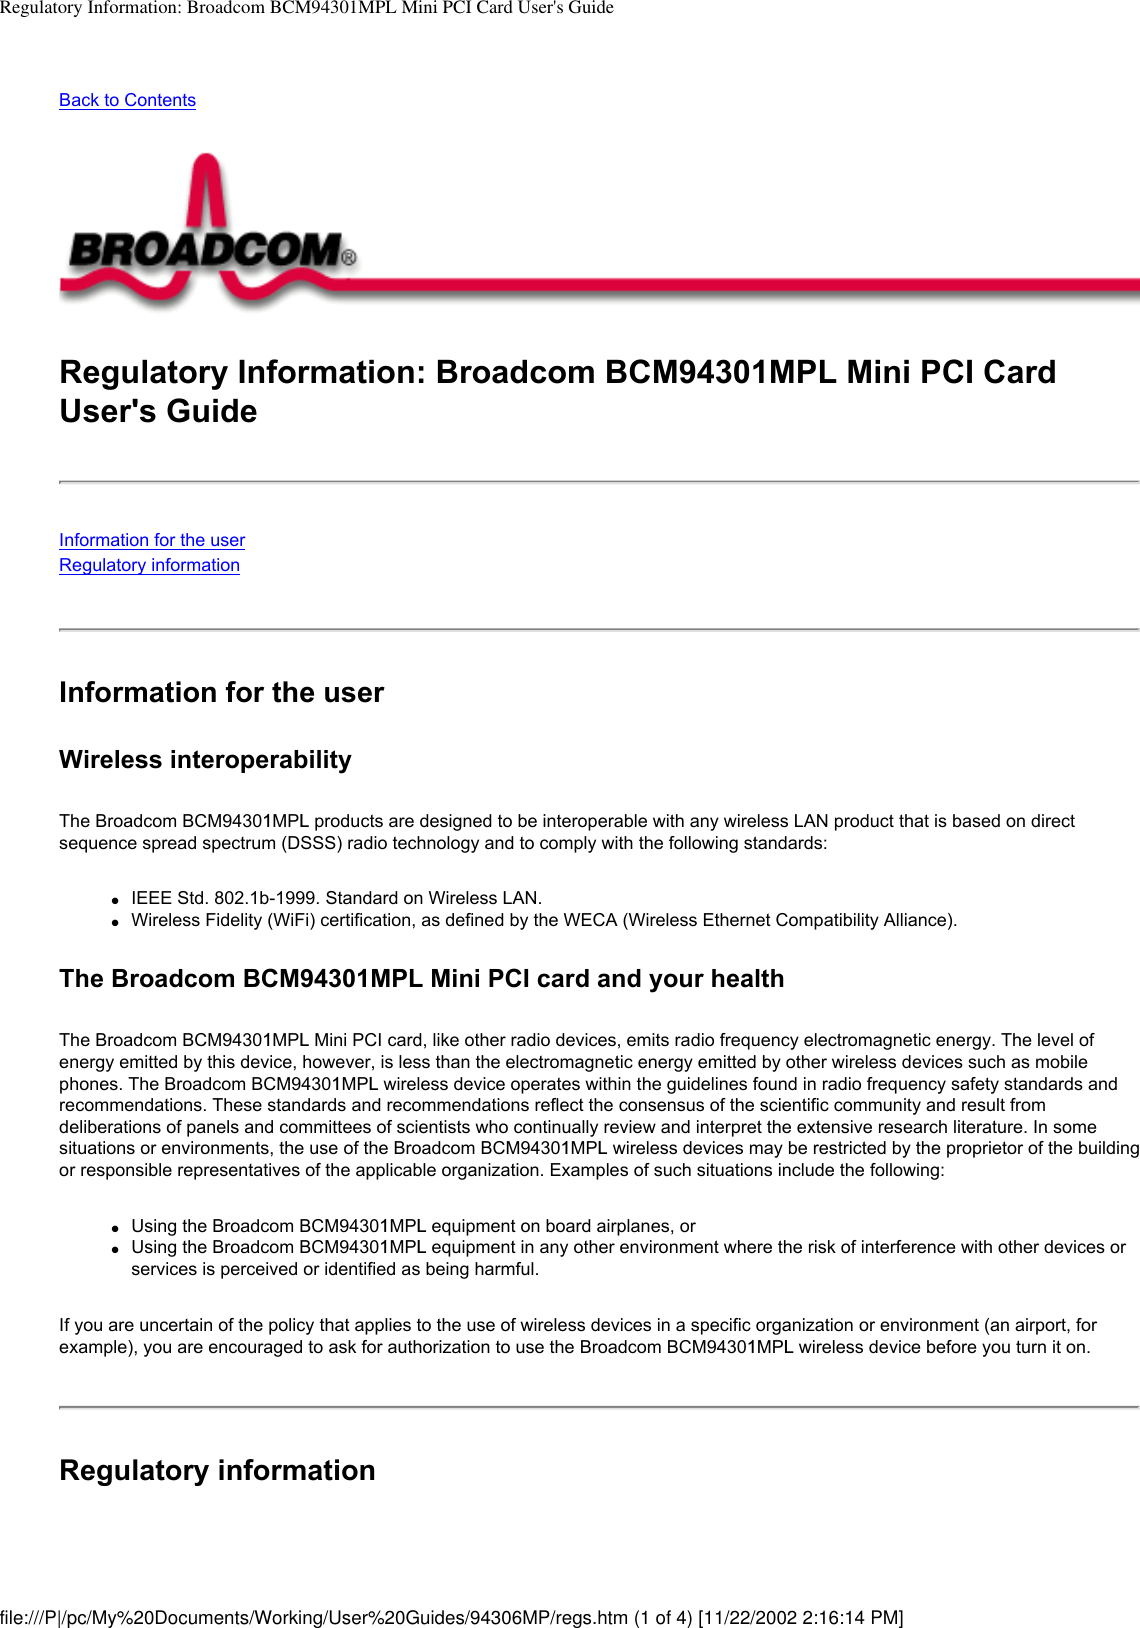 Regulatory Information: Broadcom BCM94301MPL Mini PCI Card User&apos;s GuideBack to ContentsRegulatory Information: Broadcom BCM94301MPL Mini PCI Card User&apos;s GuideInformation for the userRegulatory informationInformation for the userWireless interoperabilityThe Broadcom BCM94301MPL products are designed to be interoperable with any wireless LAN product that is based on direct sequence spread spectrum (DSSS) radio technology and to comply with the following standards:●     IEEE Std. 802.1b-1999. Standard on Wireless LAN.●     Wireless Fidelity (WiFi) certification, as defined by the WECA (Wireless Ethernet Compatibility Alliance).The Broadcom BCM94301MPL Mini PCI card and your healthThe Broadcom BCM94301MPL Mini PCI card, like other radio devices, emits radio frequency electromagnetic energy. The level of energy emitted by this device, however, is less than the electromagnetic energy emitted by other wireless devices such as mobile phones. The Broadcom BCM94301MPL wireless device operates within the guidelines found in radio frequency safety standards and recommendations. These standards and recommendations reflect the consensus of the scientific community and result from deliberations of panels and committees of scientists who continually review and interpret the extensive research literature. In some situations or environments, the use of the Broadcom BCM94301MPL wireless devices may be restricted by the proprietor of the building or responsible representatives of the applicable organization. Examples of such situations include the following:●     Using the Broadcom BCM94301MPL equipment on board airplanes, or●     Using the Broadcom BCM94301MPL equipment in any other environment where the risk of interference with other devices or services is perceived or identified as being harmful.If you are uncertain of the policy that applies to the use of wireless devices in a specific organization or environment (an airport, for example), you are encouraged to ask for authorization to use the Broadcom BCM94301MPL wireless device before you turn it on.Regulatory informationfile:///P|/pc/My%20Documents/Working/User%20Guides/94306MP/regs.htm (1 of 4) [11/22/2002 2:16:14 PM]